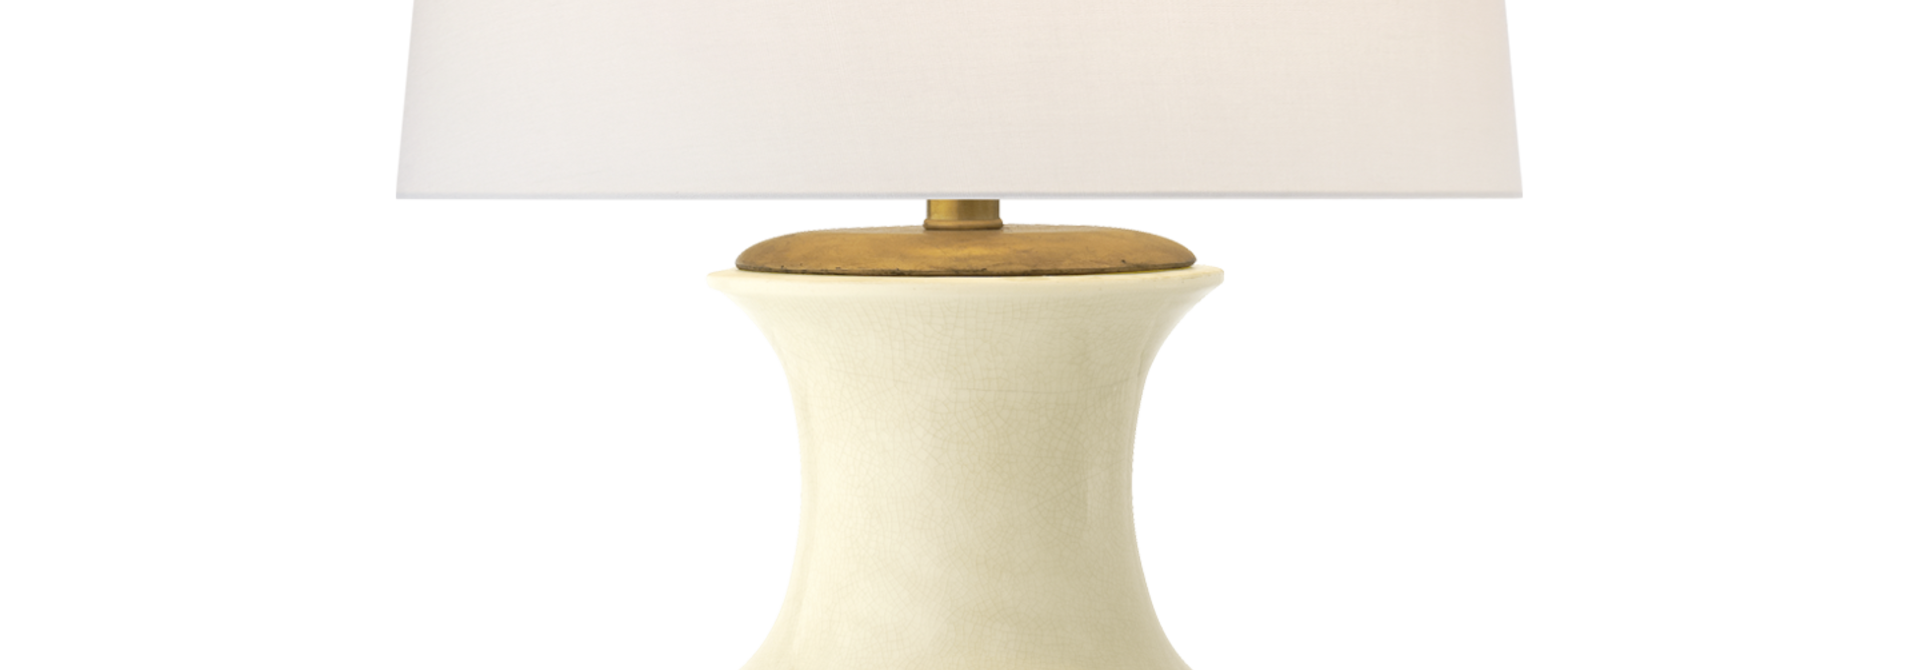 Deauville | The Table Lamp Collection, Tea Stain Porcelain - 18 Inch x 18 Inch x 30.25 Inch